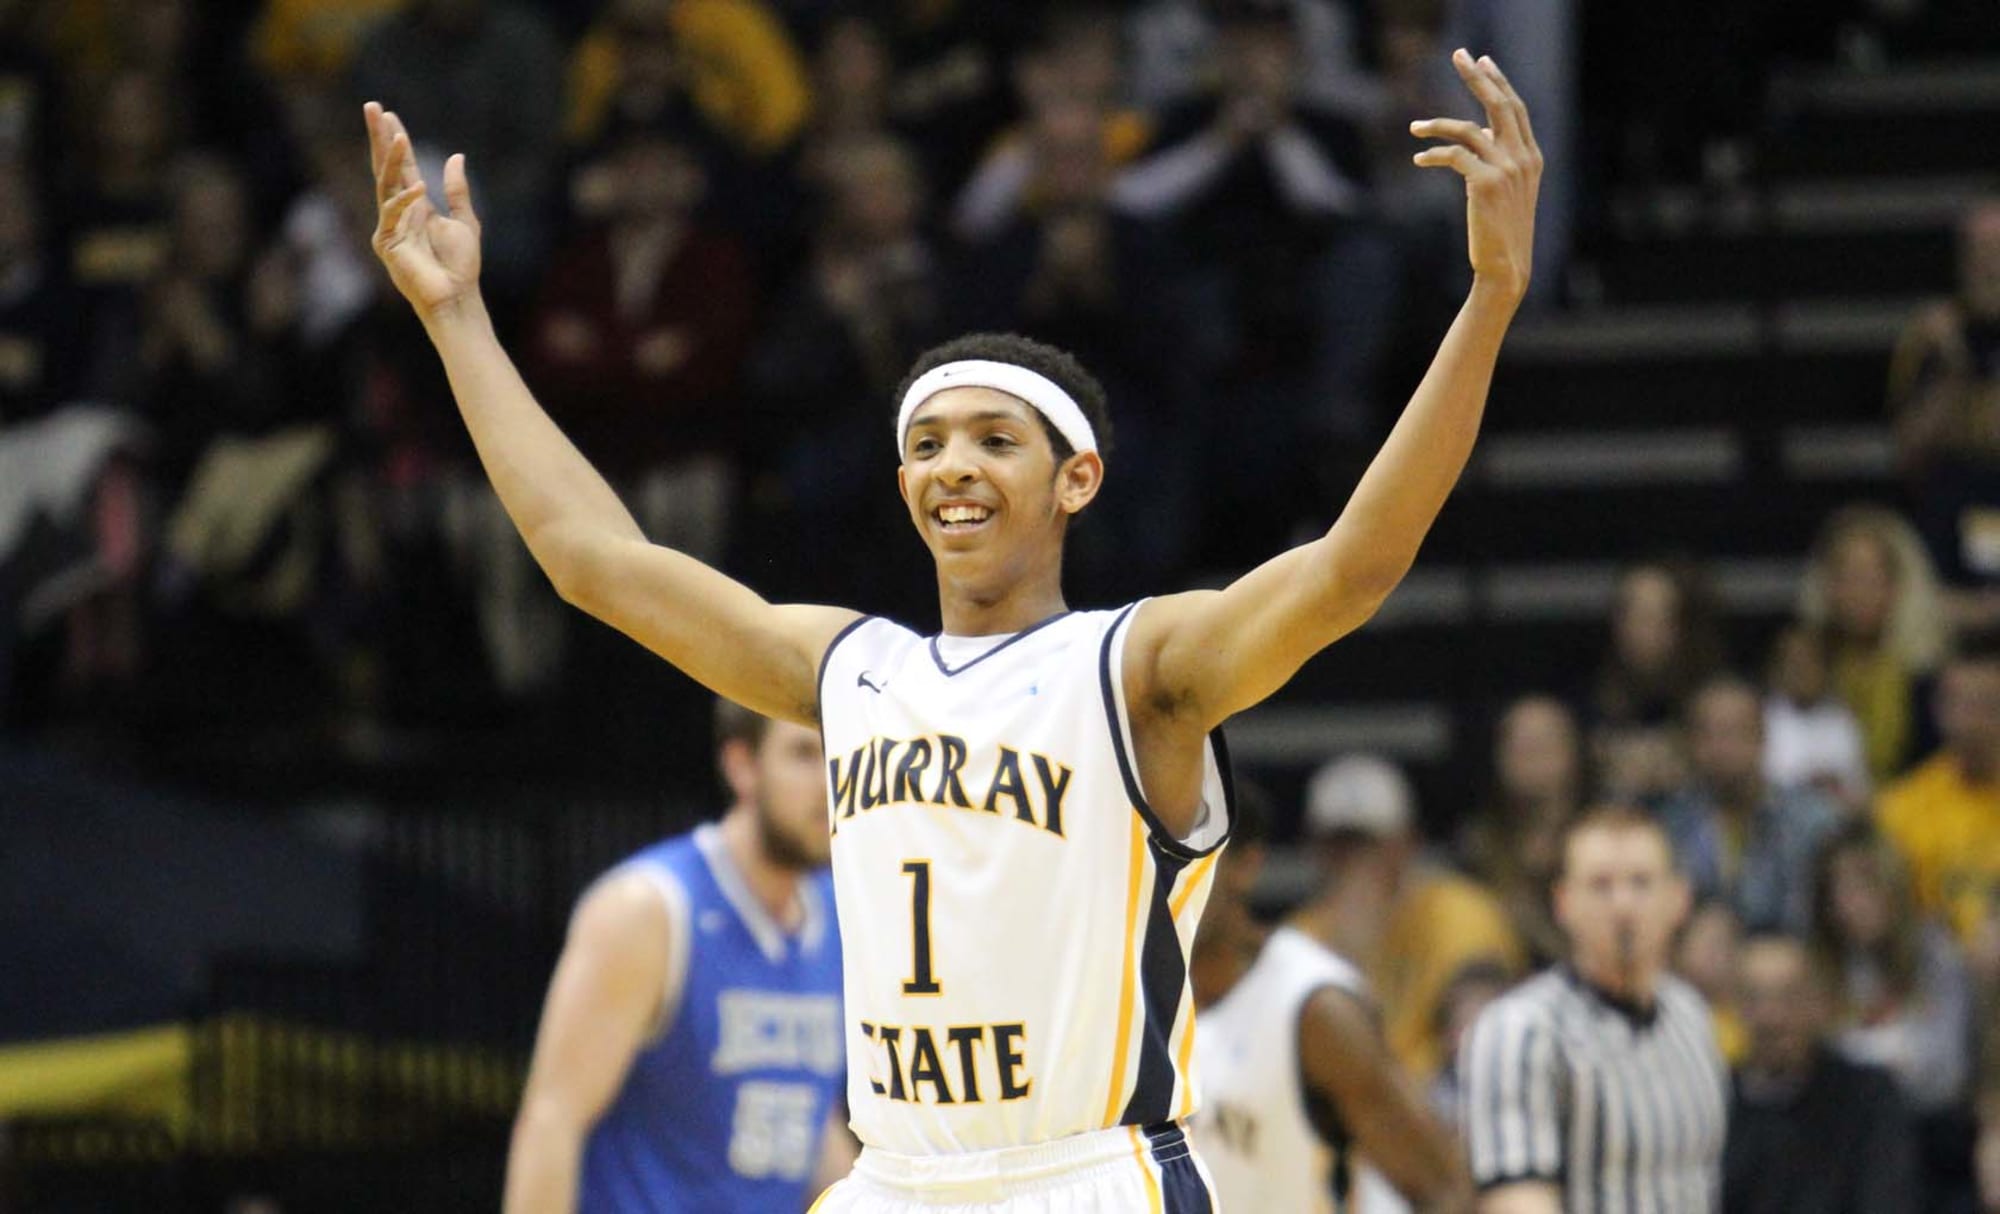 Cameron Payne Will the Indiana Pacers Draft Him 11th?